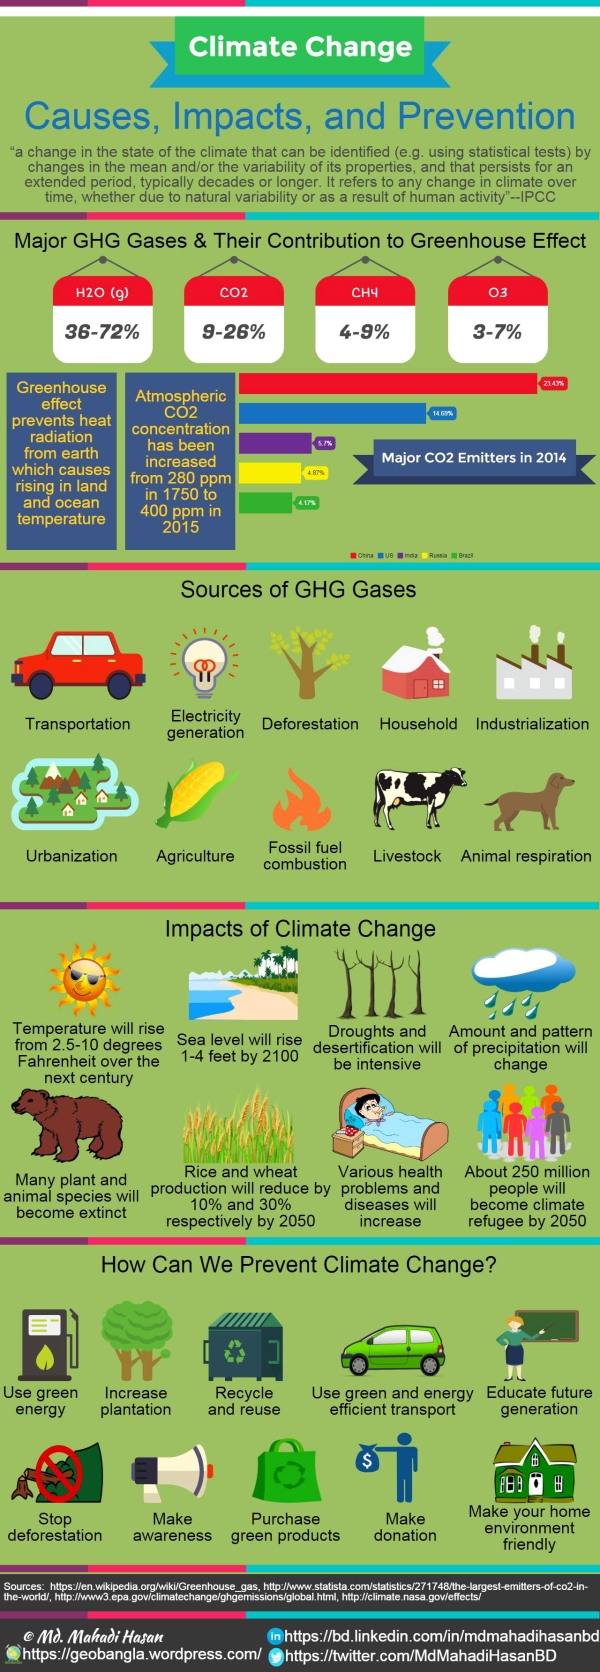 Climate change is the greatest threat that the world is facing today. Greenhouse effect prevents the heat radiation from earth which causes rising in land and ocean temperature. Major greenhouse gases are H2O, CO2, CH4, and O3. China, USA, India, Russia, and Brazil are the major greenhouse gas emitters. Major sources of greenhouse gas emission are transportation, fossil fuel combustion, industrialization, electricity generation etc. There are many impacts of climate change like increase in world temperature, sea level rise, natural disaster etc. We should use green energy, green products, green fuel to prevent climate change.